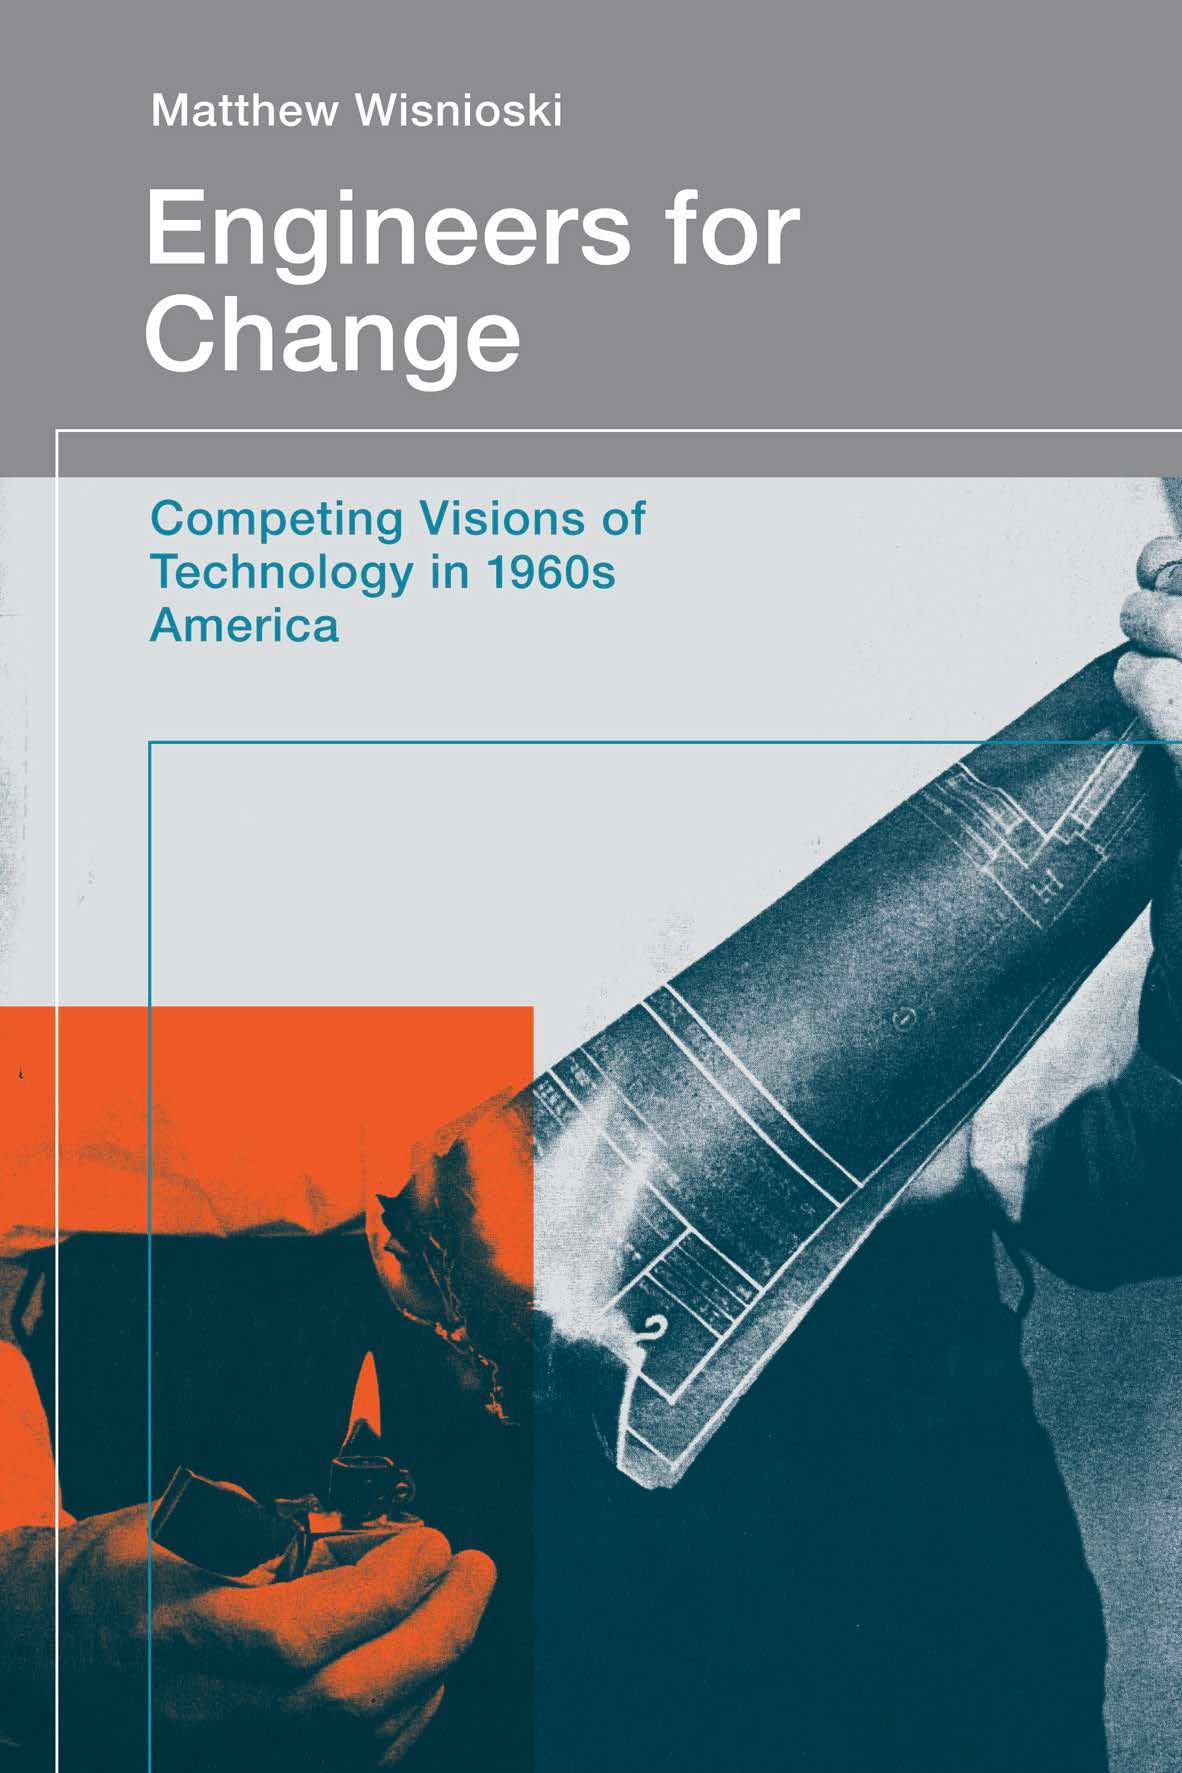 The cover of Matthew Wisnioski's book called Engineers for Change: Competing Visions of Technology in 1960s America.